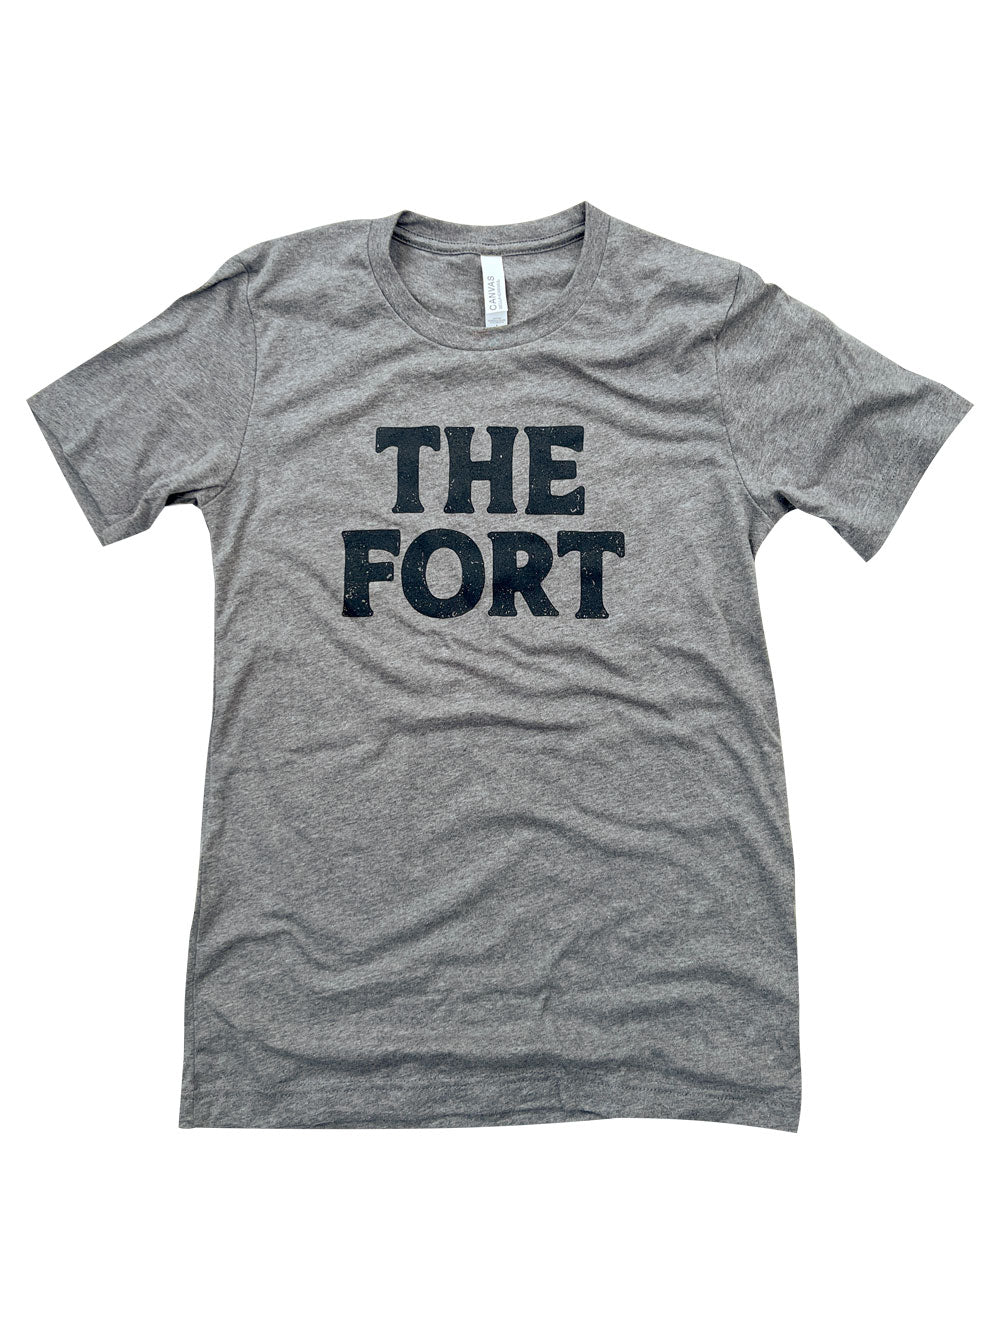 The Fort gray heather t-shirt